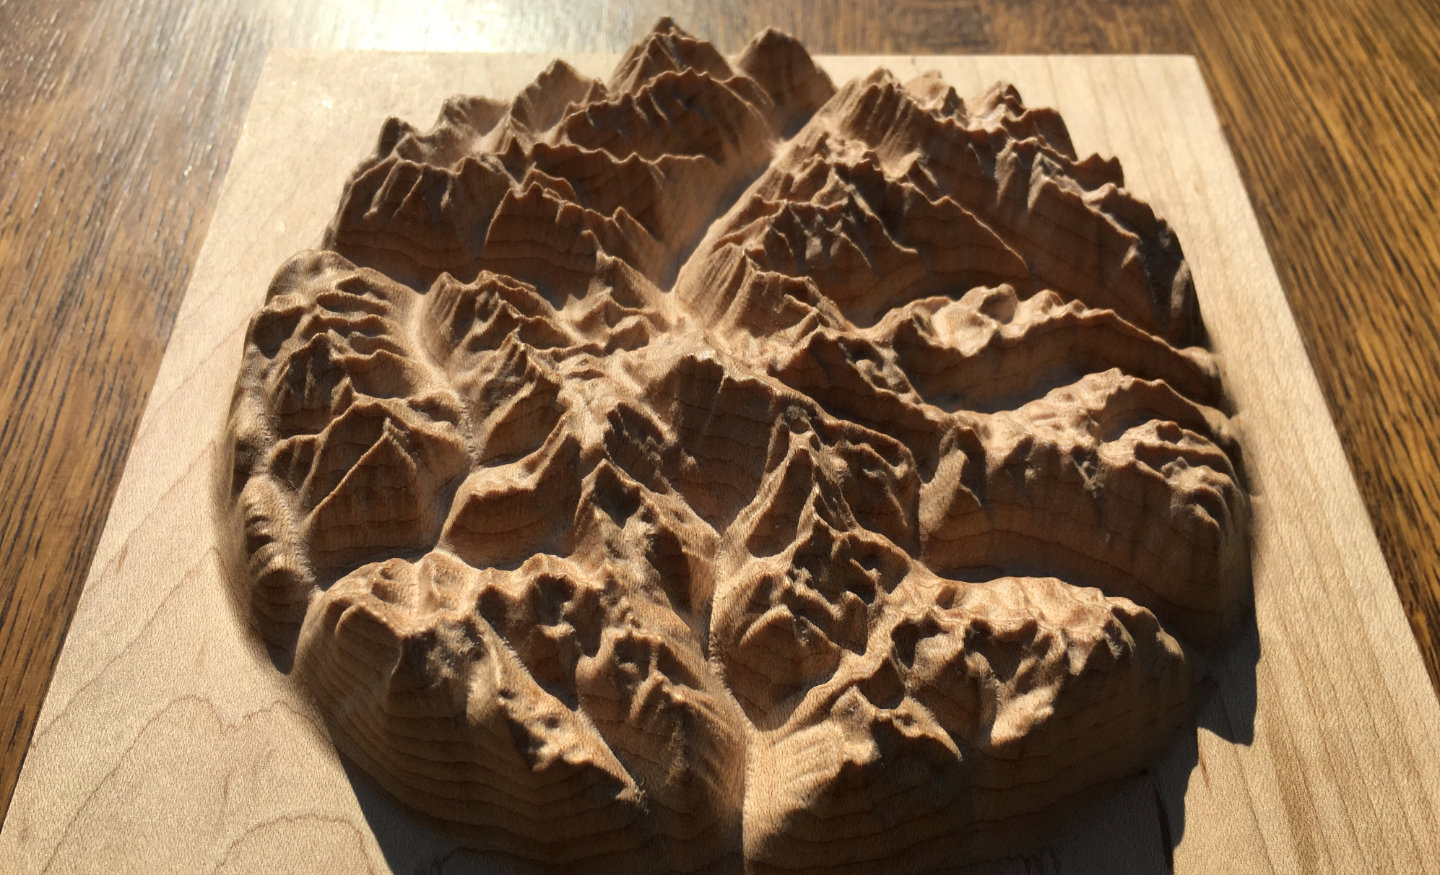 three-dimensional wood-carved relief map of the mountains around Kokanee Glacier in the Kootenays, British Columbia, Canada